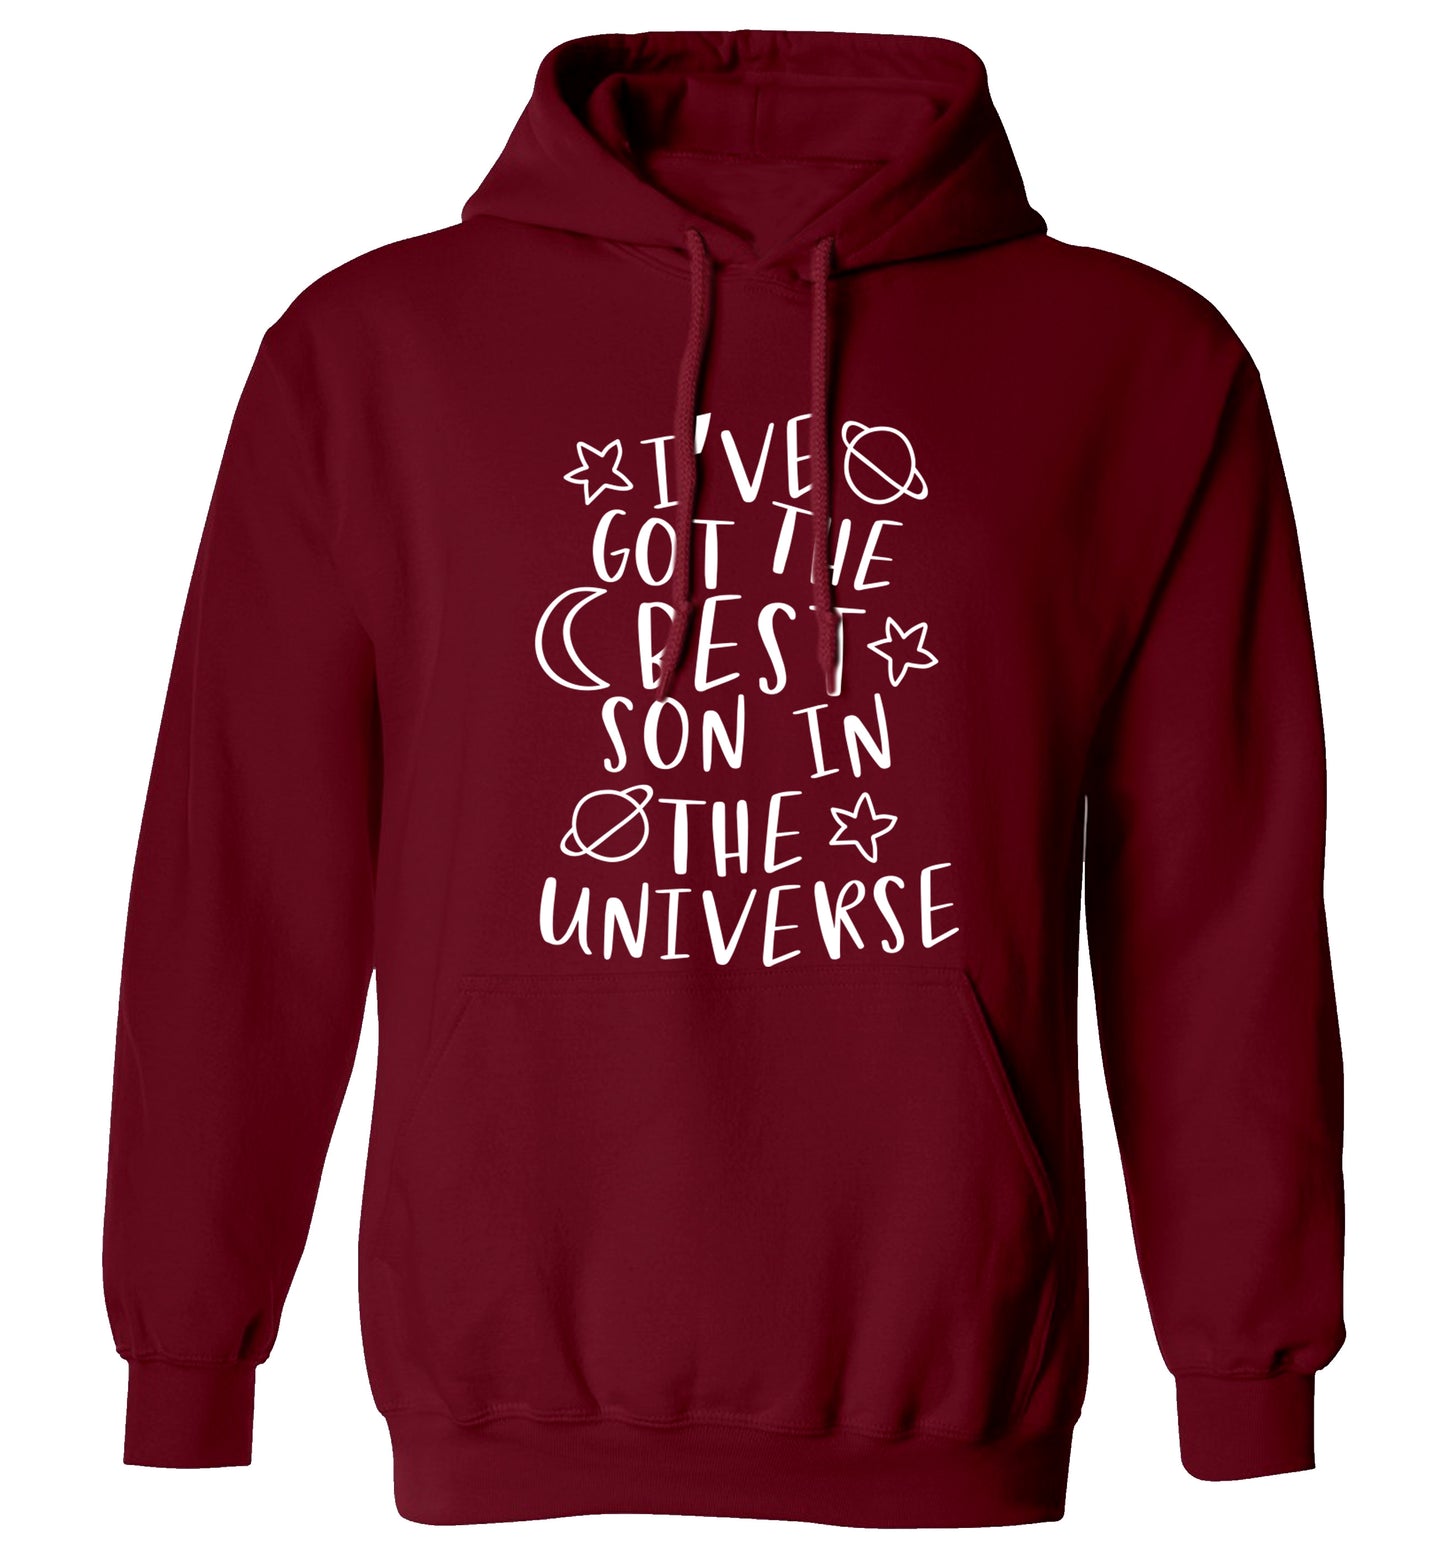 I've got the best son in the universe adults unisex maroon hoodie 2XL